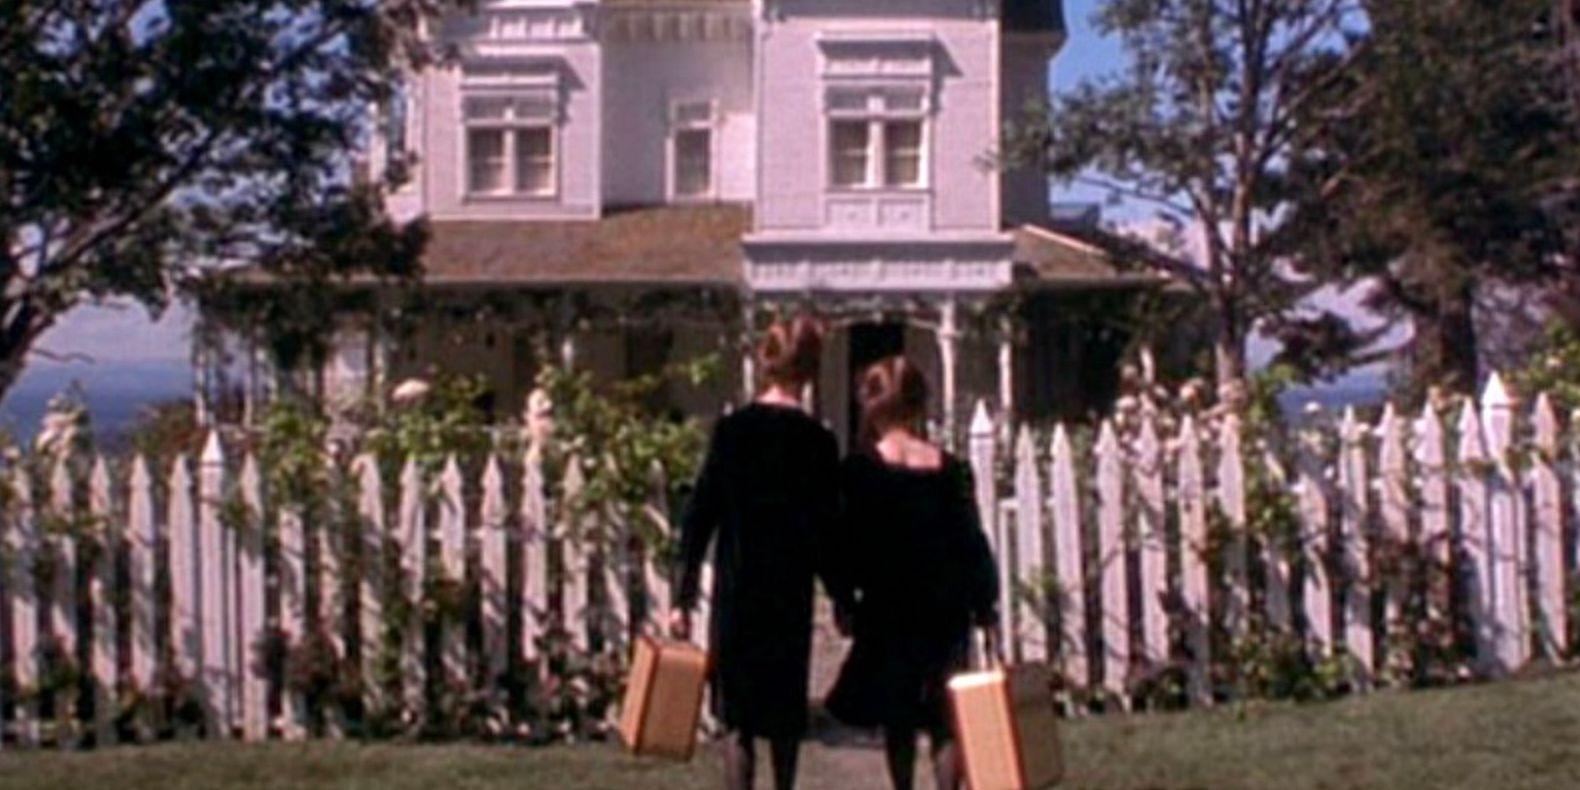 Gilly and Sally arriving to the house as children in Practical Magic